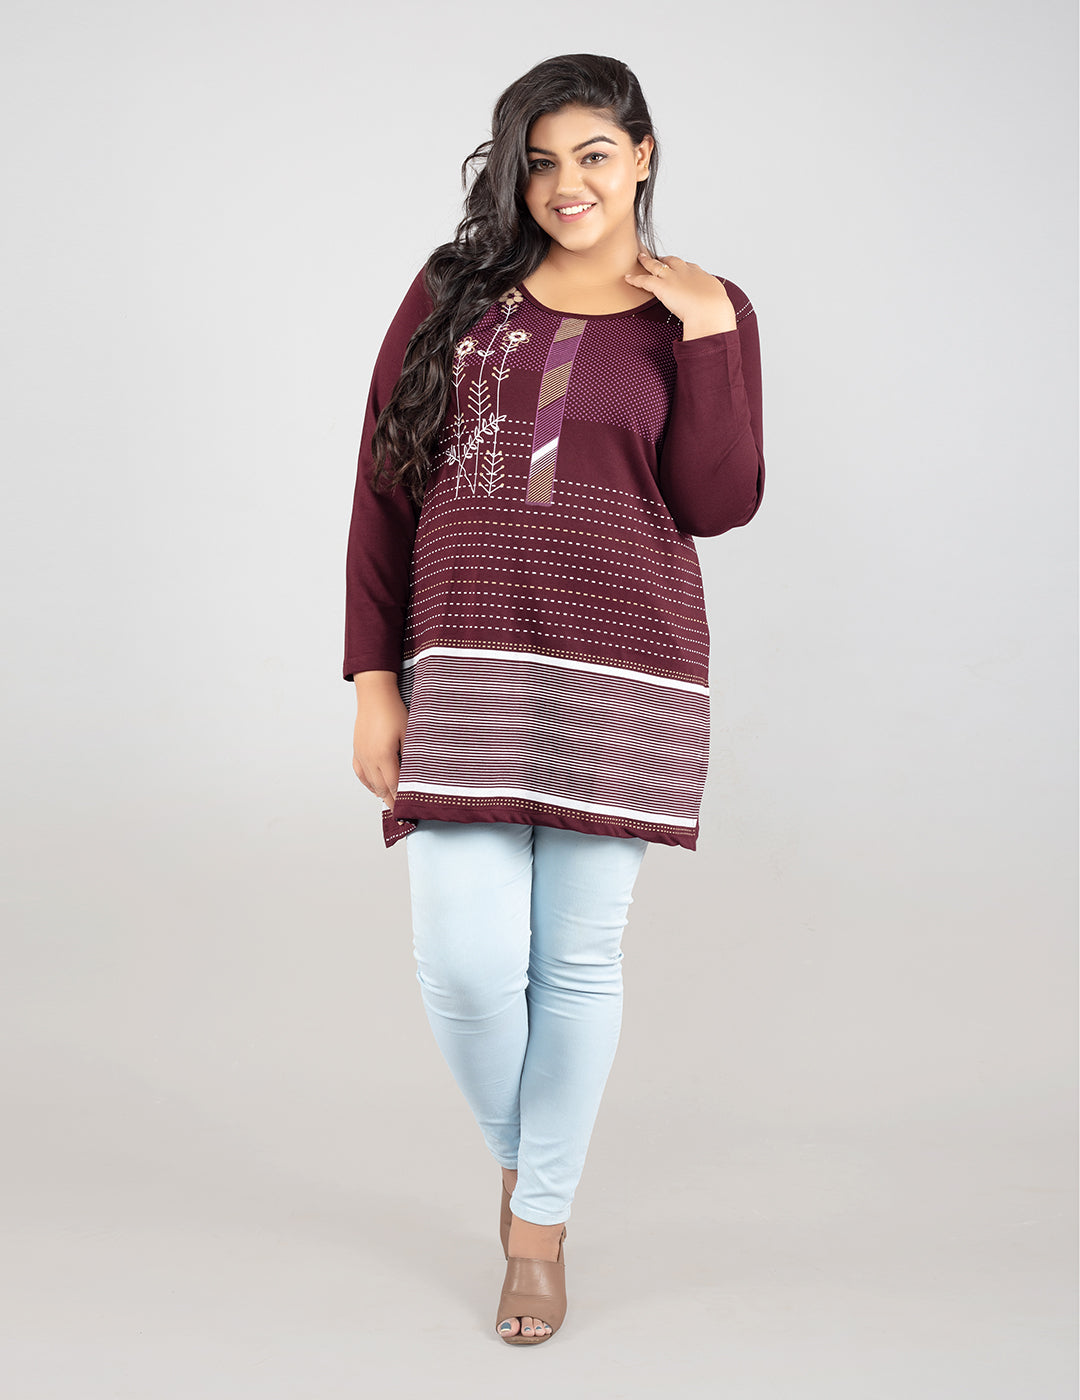 Full Sleeves Ladies Long Tops, Size : M, XL, Feature : Comfortable, Easily  Washable, Impeccable Finish at Best Price in Mumbai